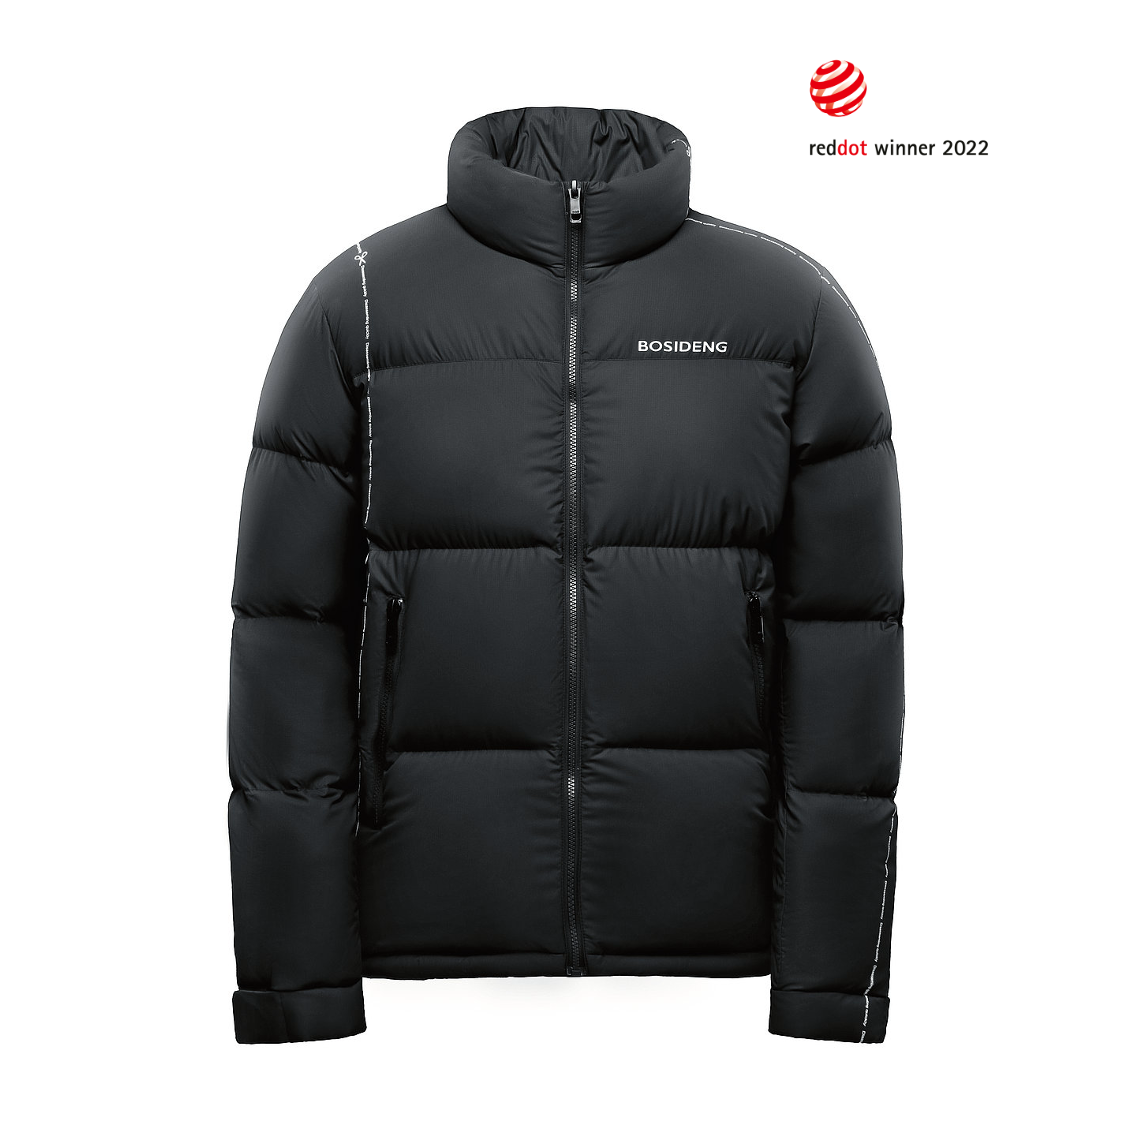 Nominee ISPO Award The City Jacket of Adidas the 2022: COLD.RDY MYSHELTER from